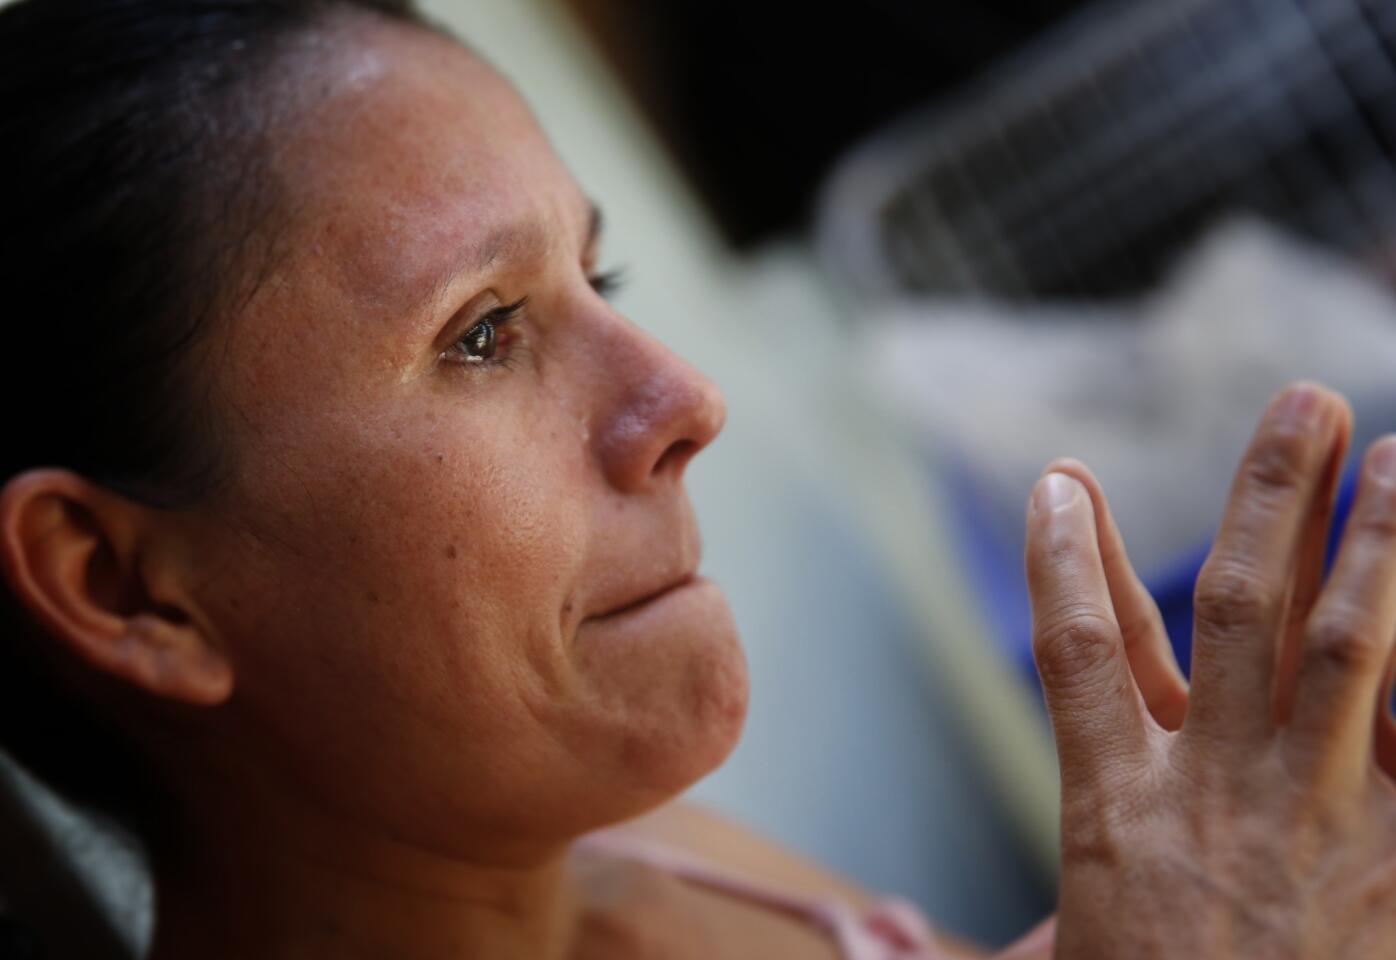 Just hours before departing San Pedro Sula, Honduras, Ana Marie Ramos, 35, cries as she talks about the gang slaying of her sister, the suicide of her brother and the passing of her elderly mother.